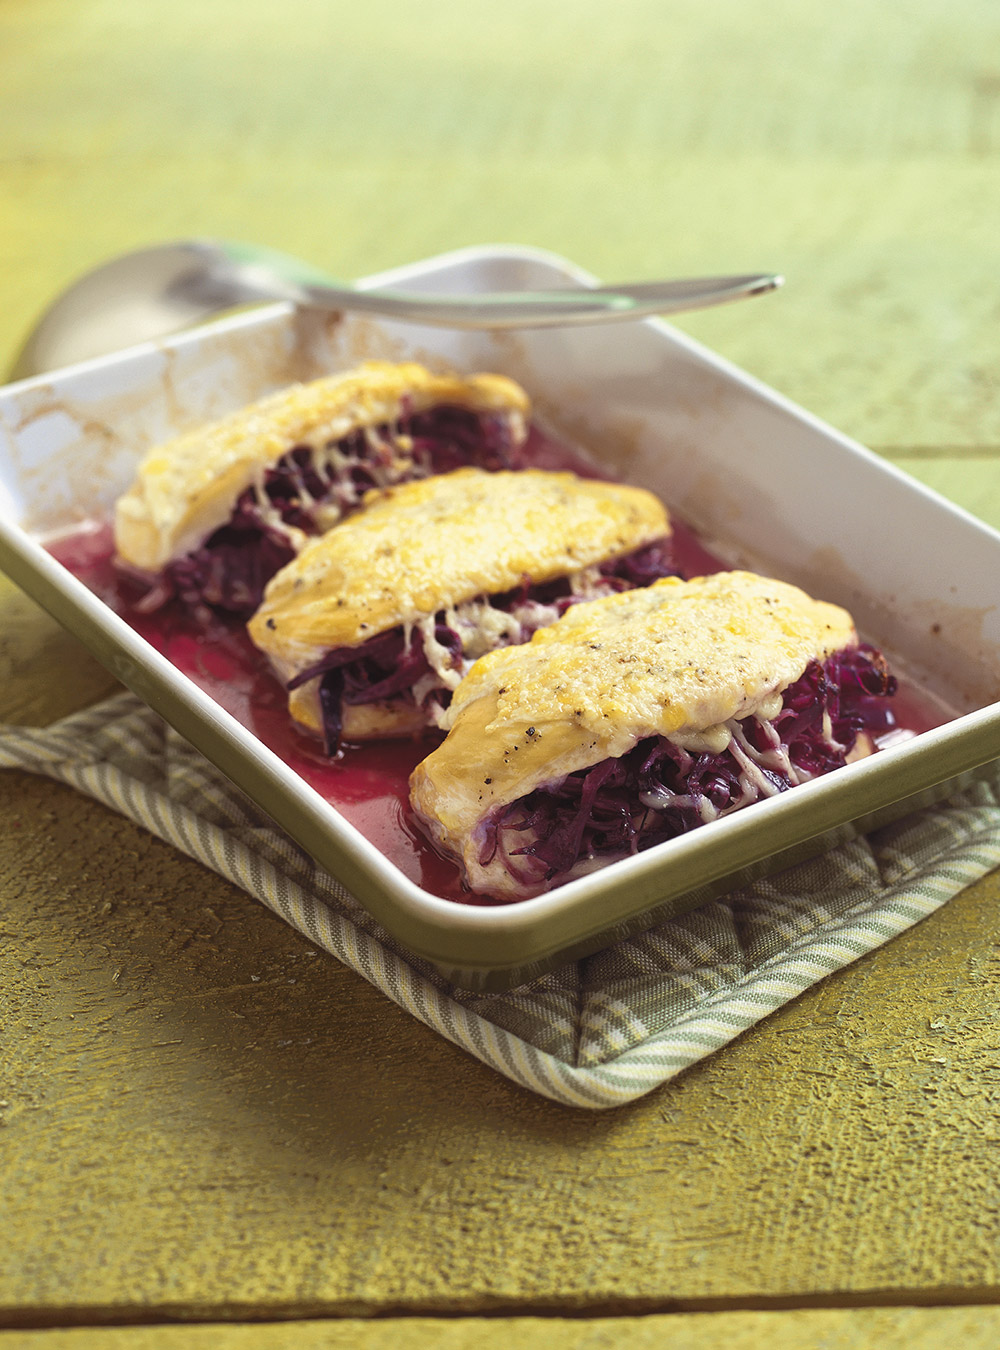 Chicken Stuffed with Goat Cheese and Red Cabbage